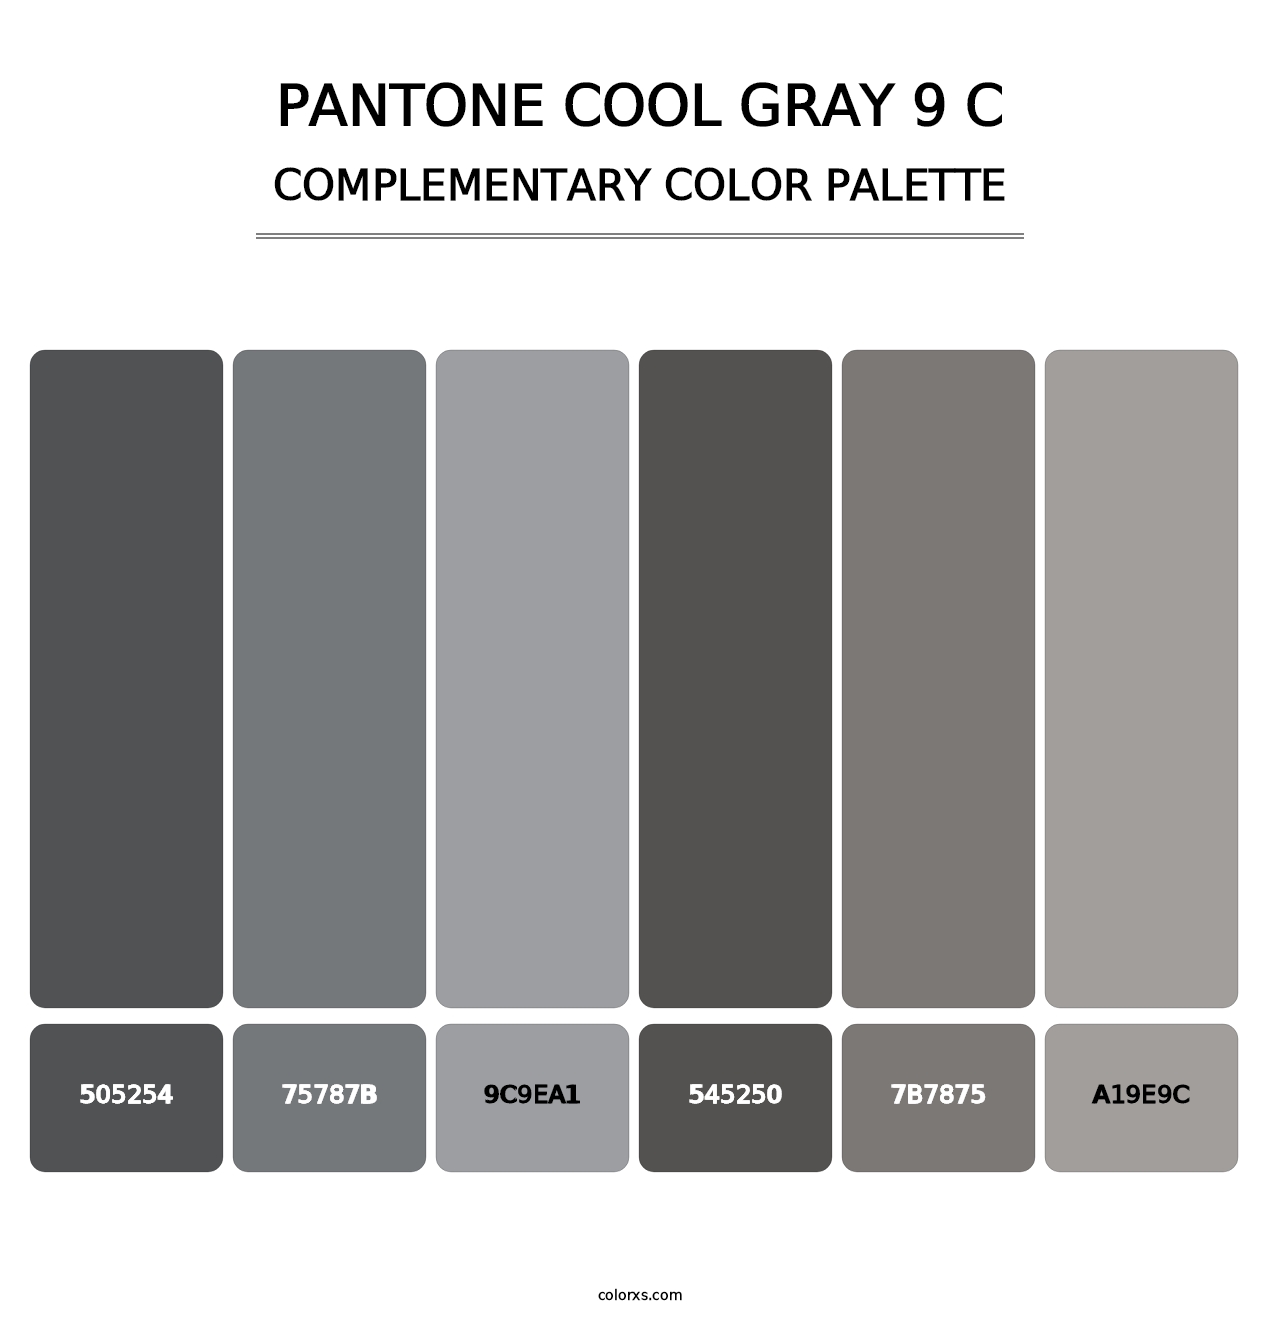 PANTONE Cool Gray 9 C - Complementary Color Palette